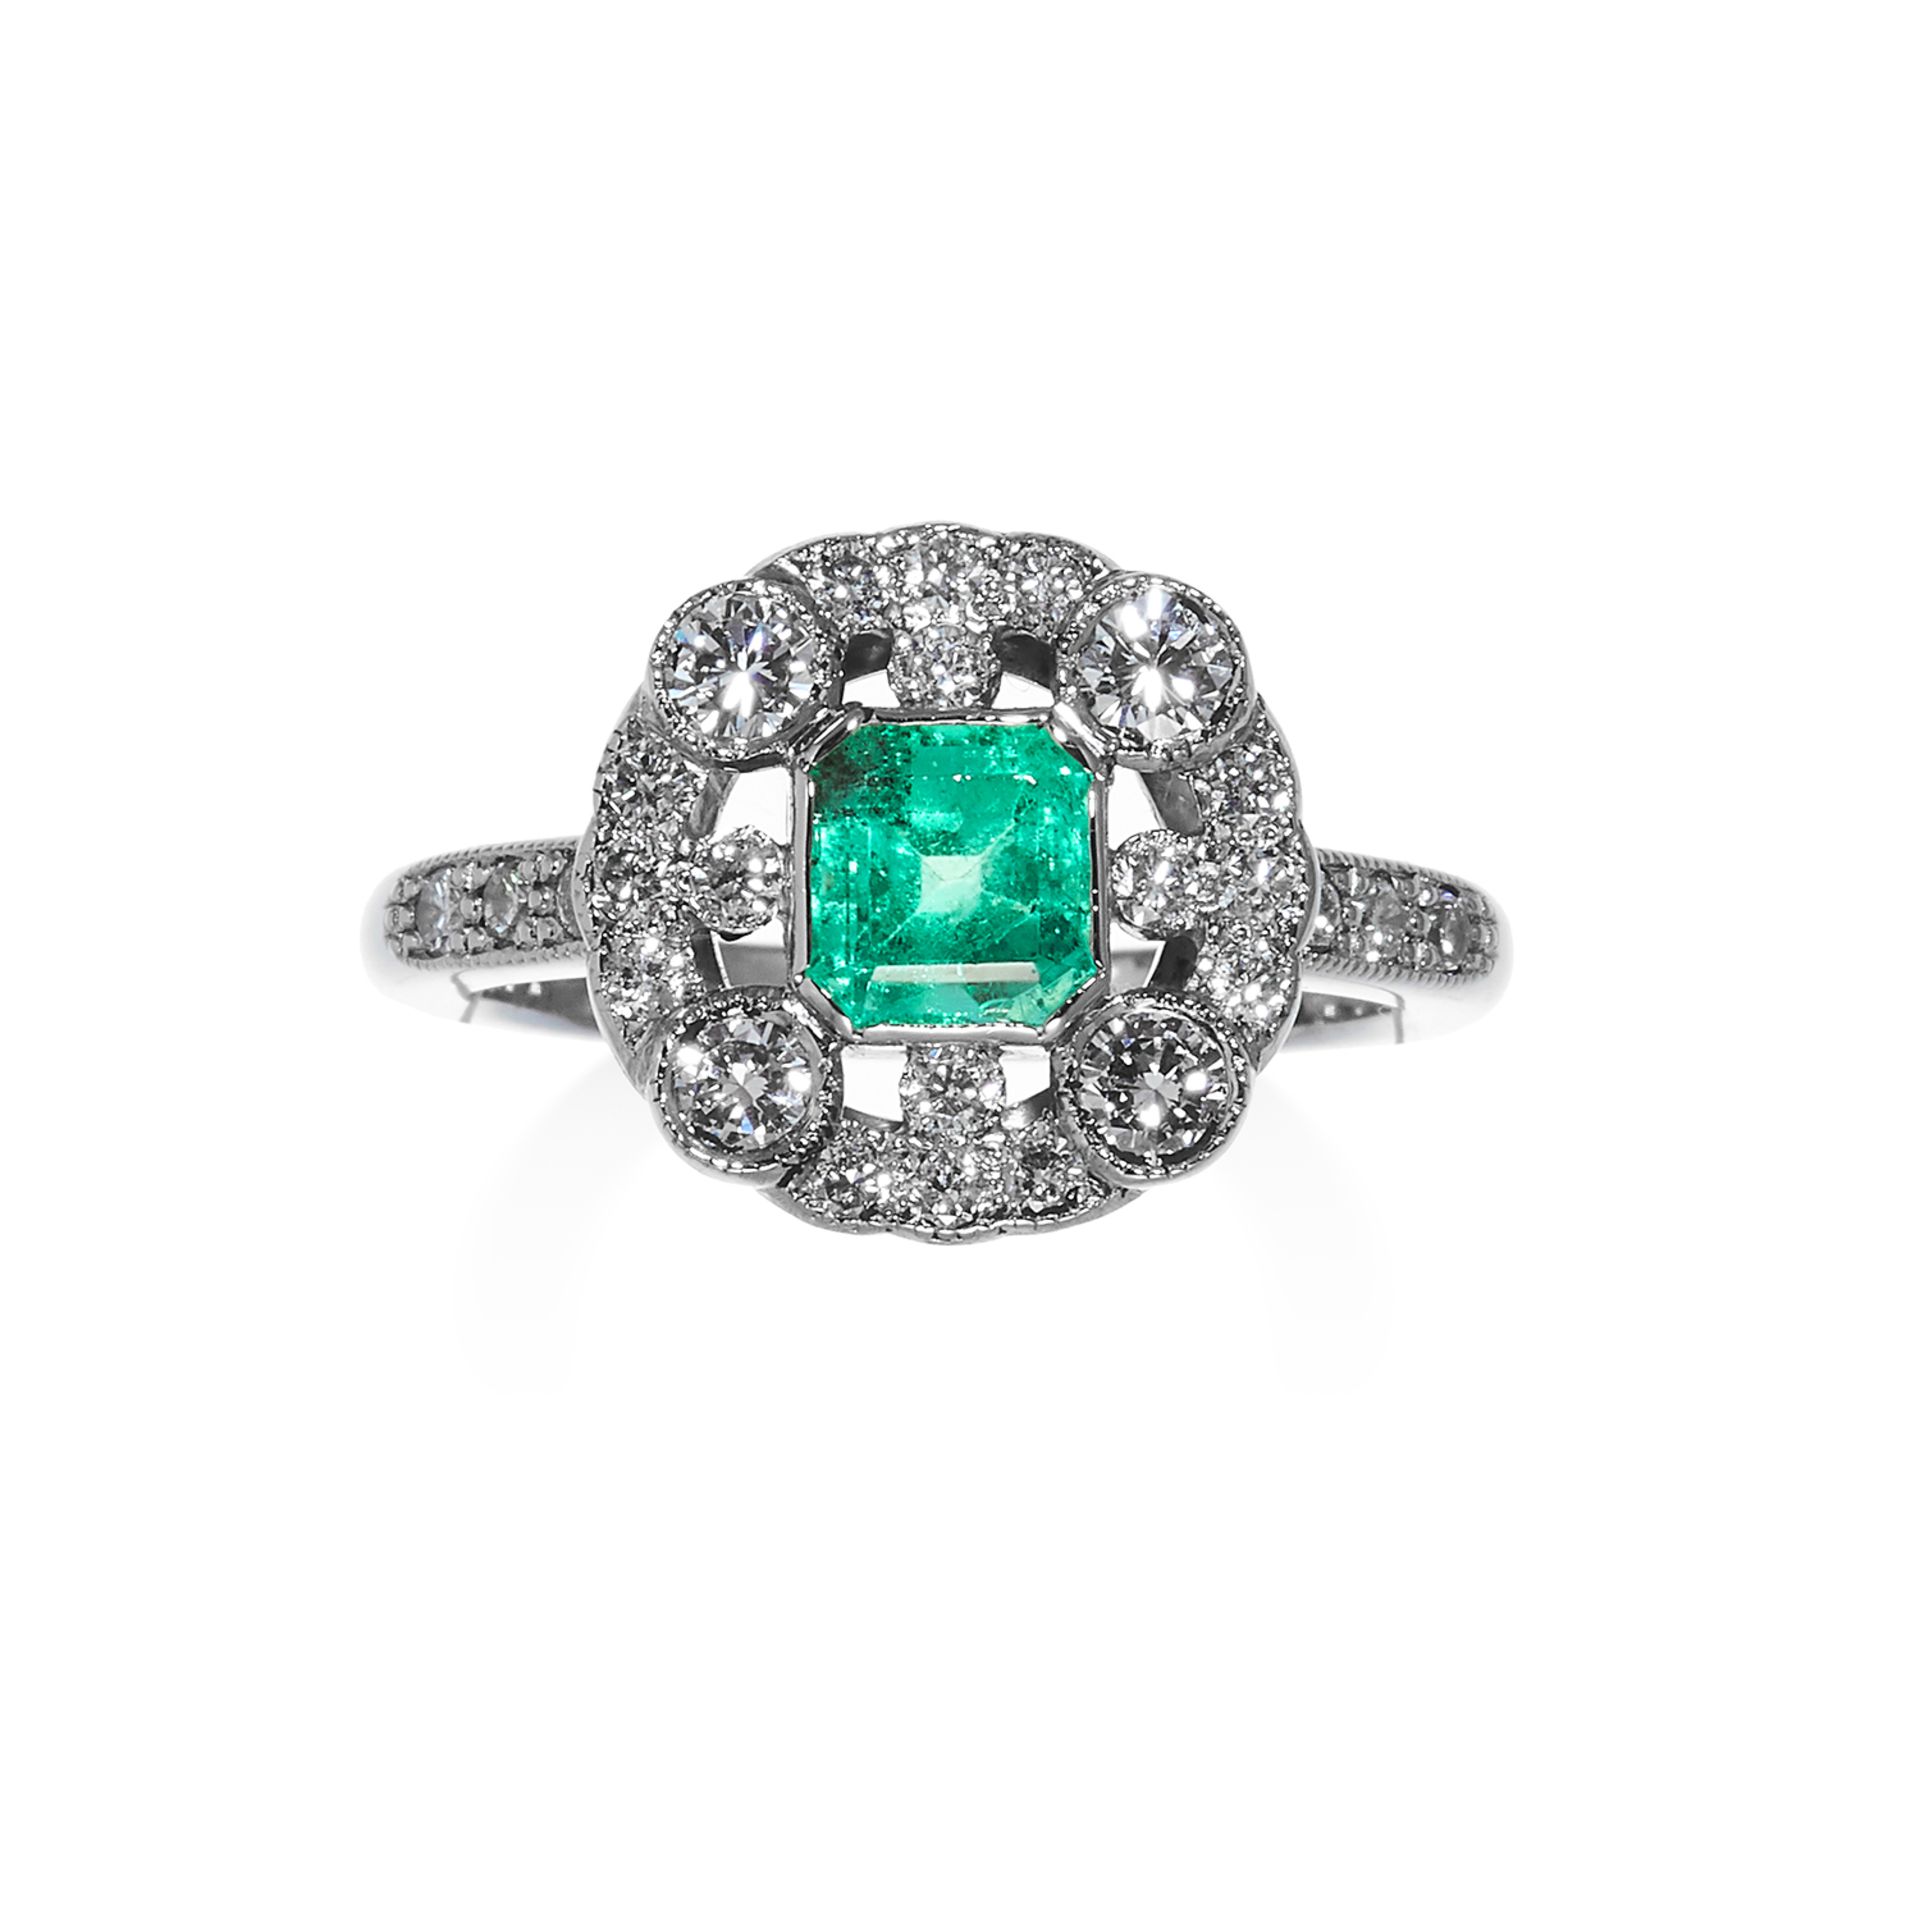 AN EMERALD AND DIAMOND DRESS RING in white gold, set with a step cut emerald encircled by round